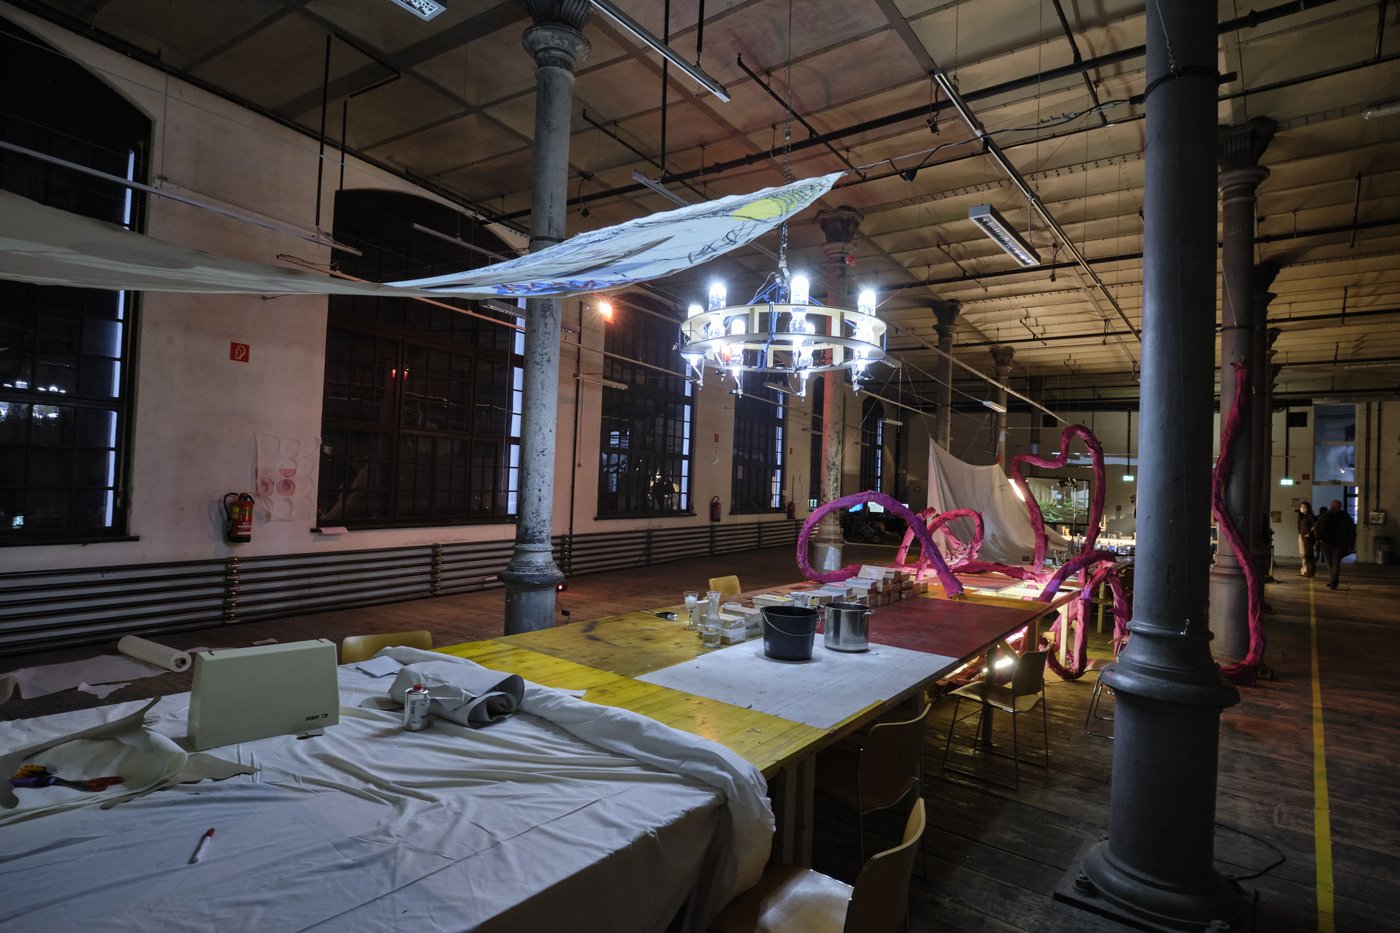 In the workroom of the stage design there is a long table with various working materials, a red paper snake, painted cloths stretched across the room above it and a chandelier.